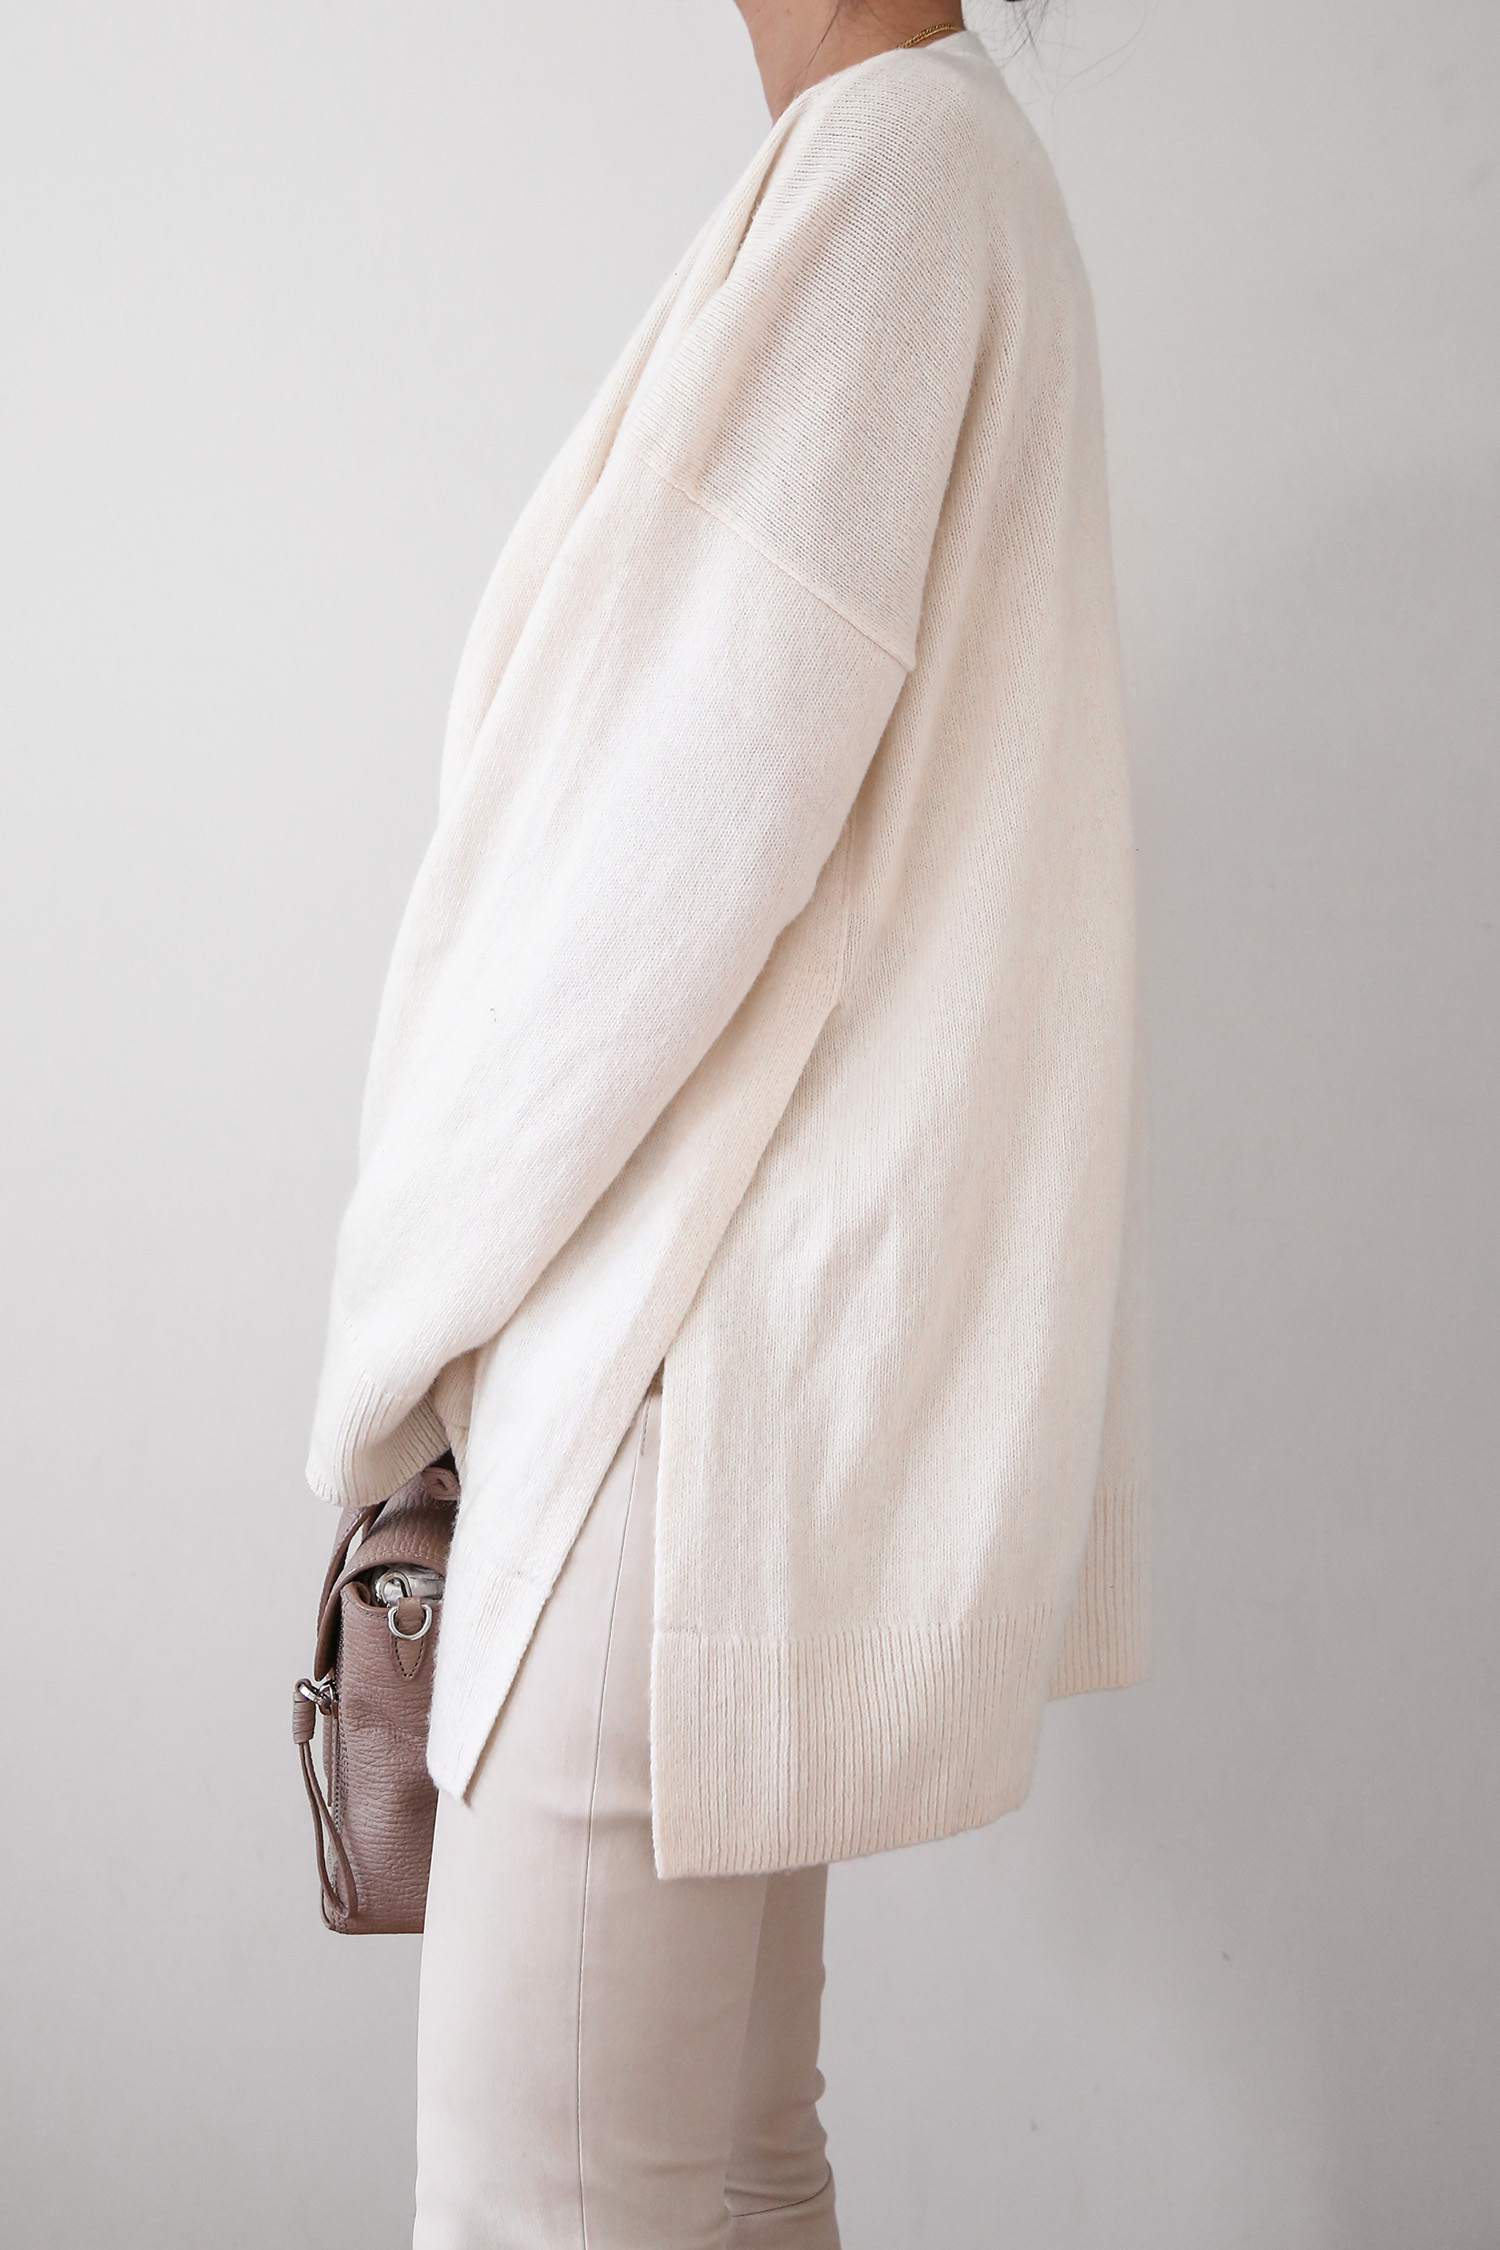 Dissh strapless top with Arket wool cardigan and leather trousers creamy toned neutrals